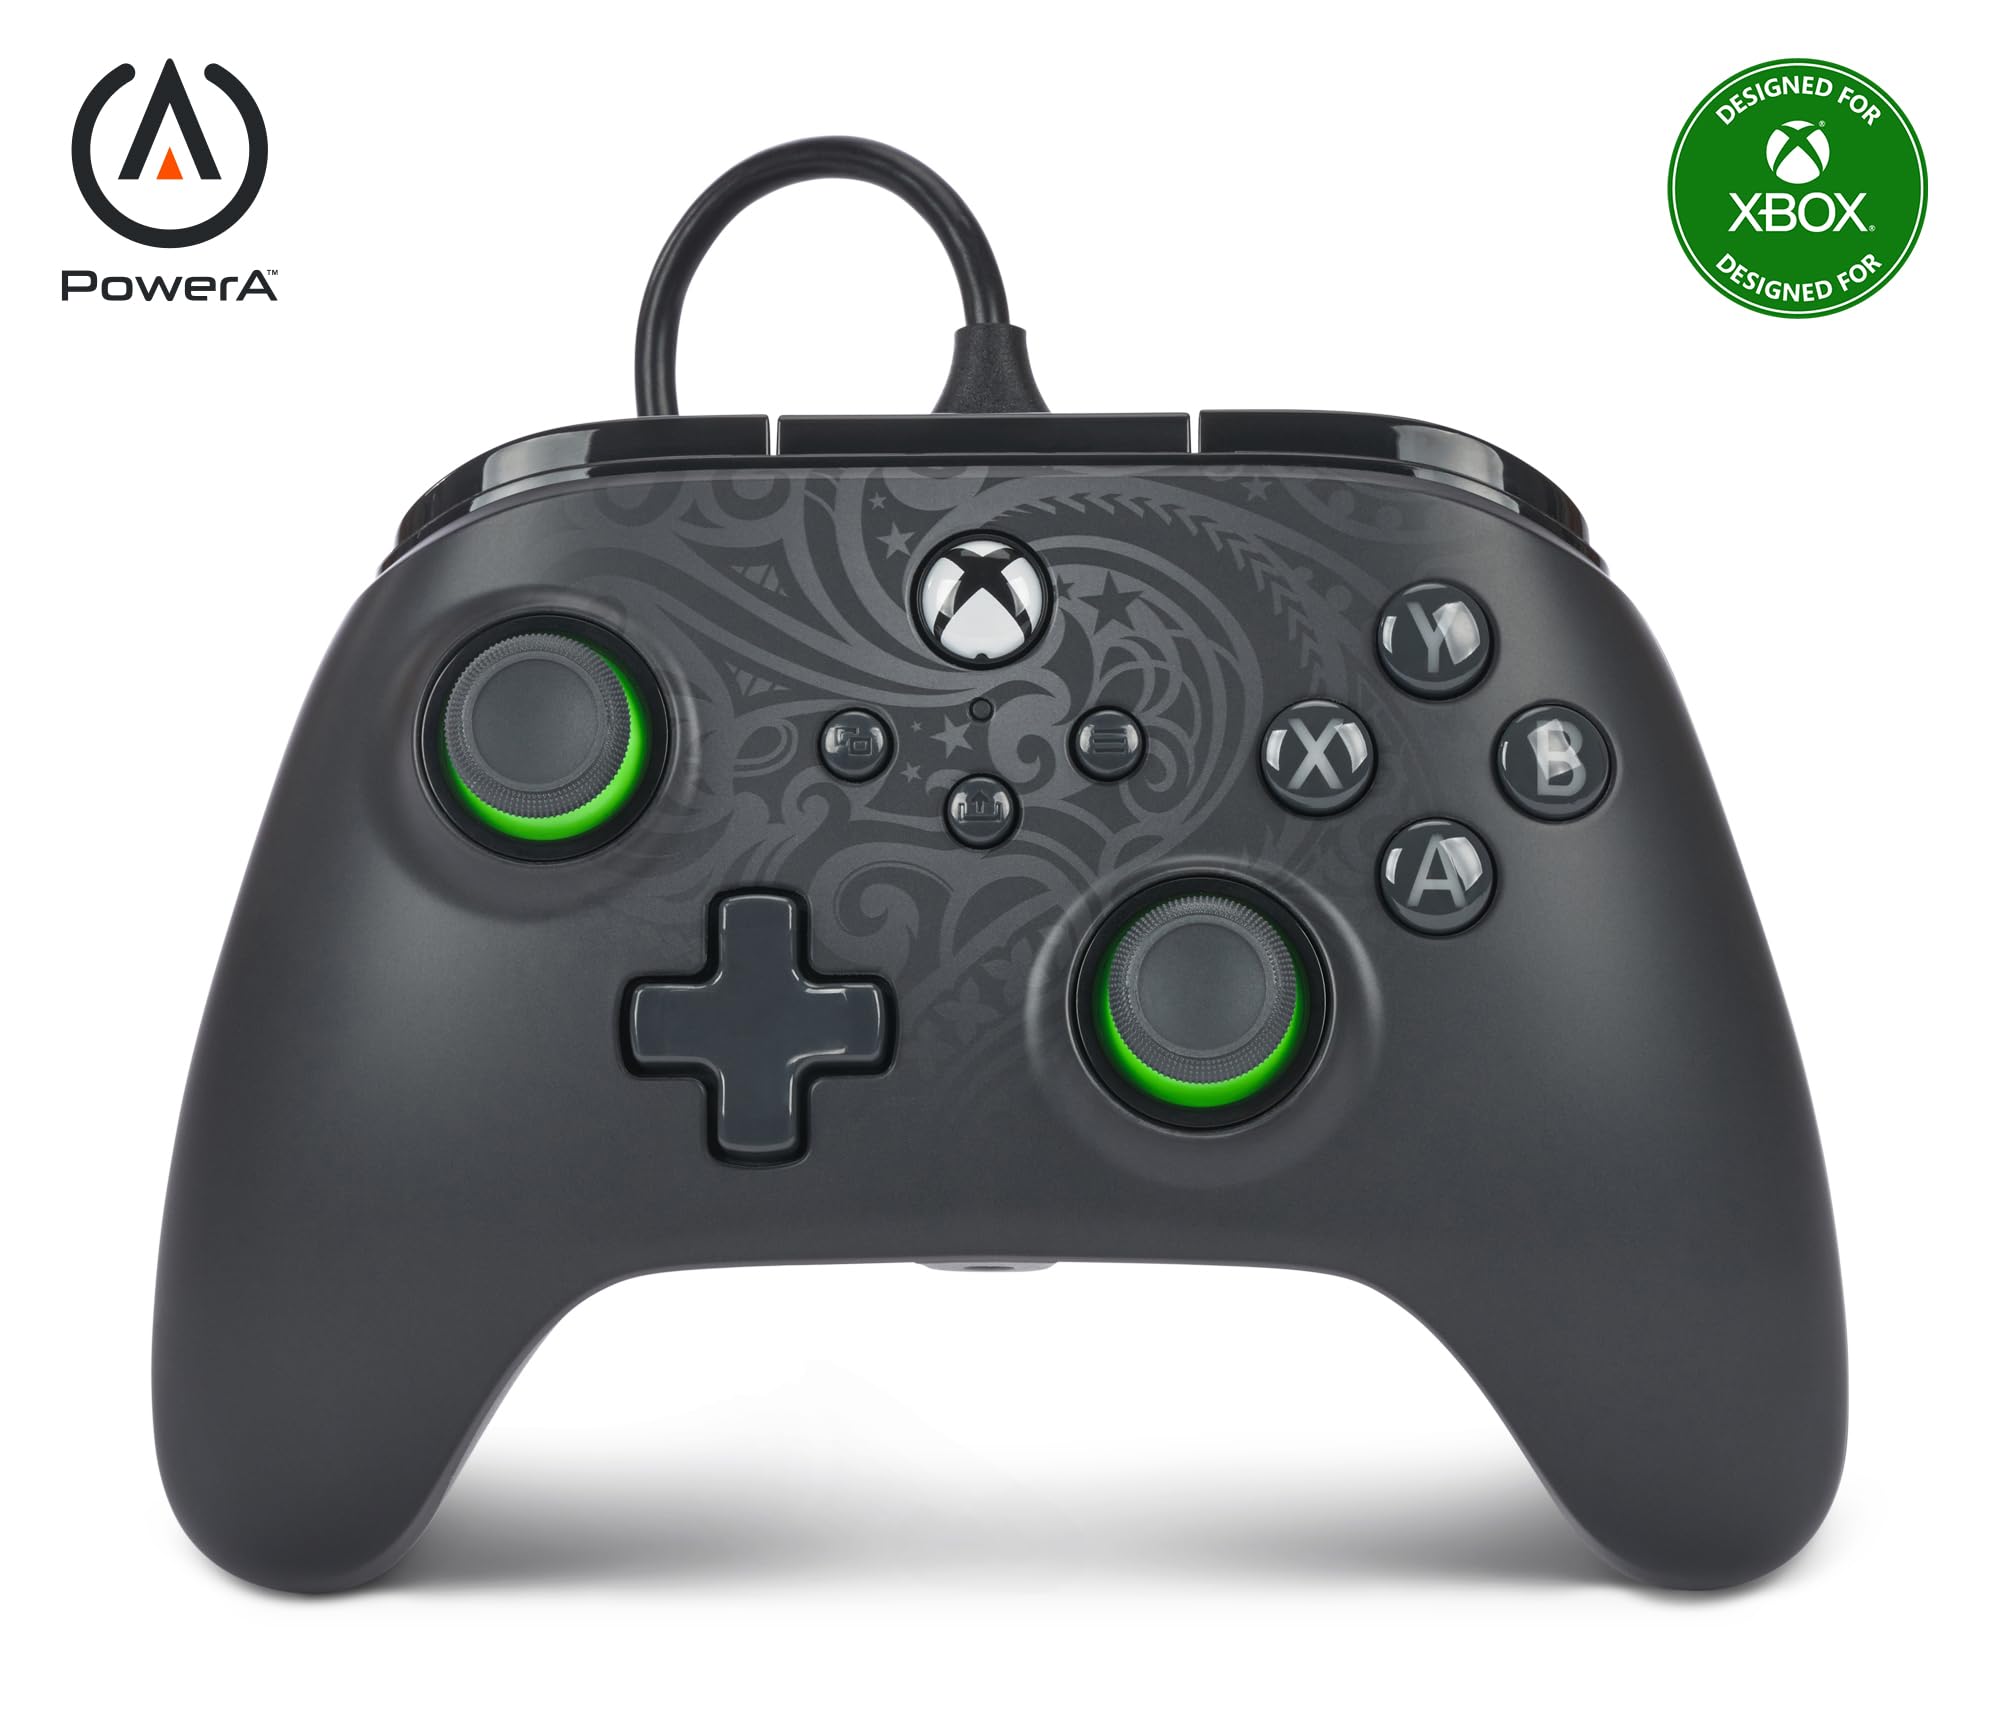 PowerA Advantage Wired Controller for Xbox Series X|S - Celestial Green, Black Xbox Controller with Detachable 10ft USB-C Cable, Mappable Buttons, Trigger Locks and Rumble Motors, Officially Licensed for Xbox